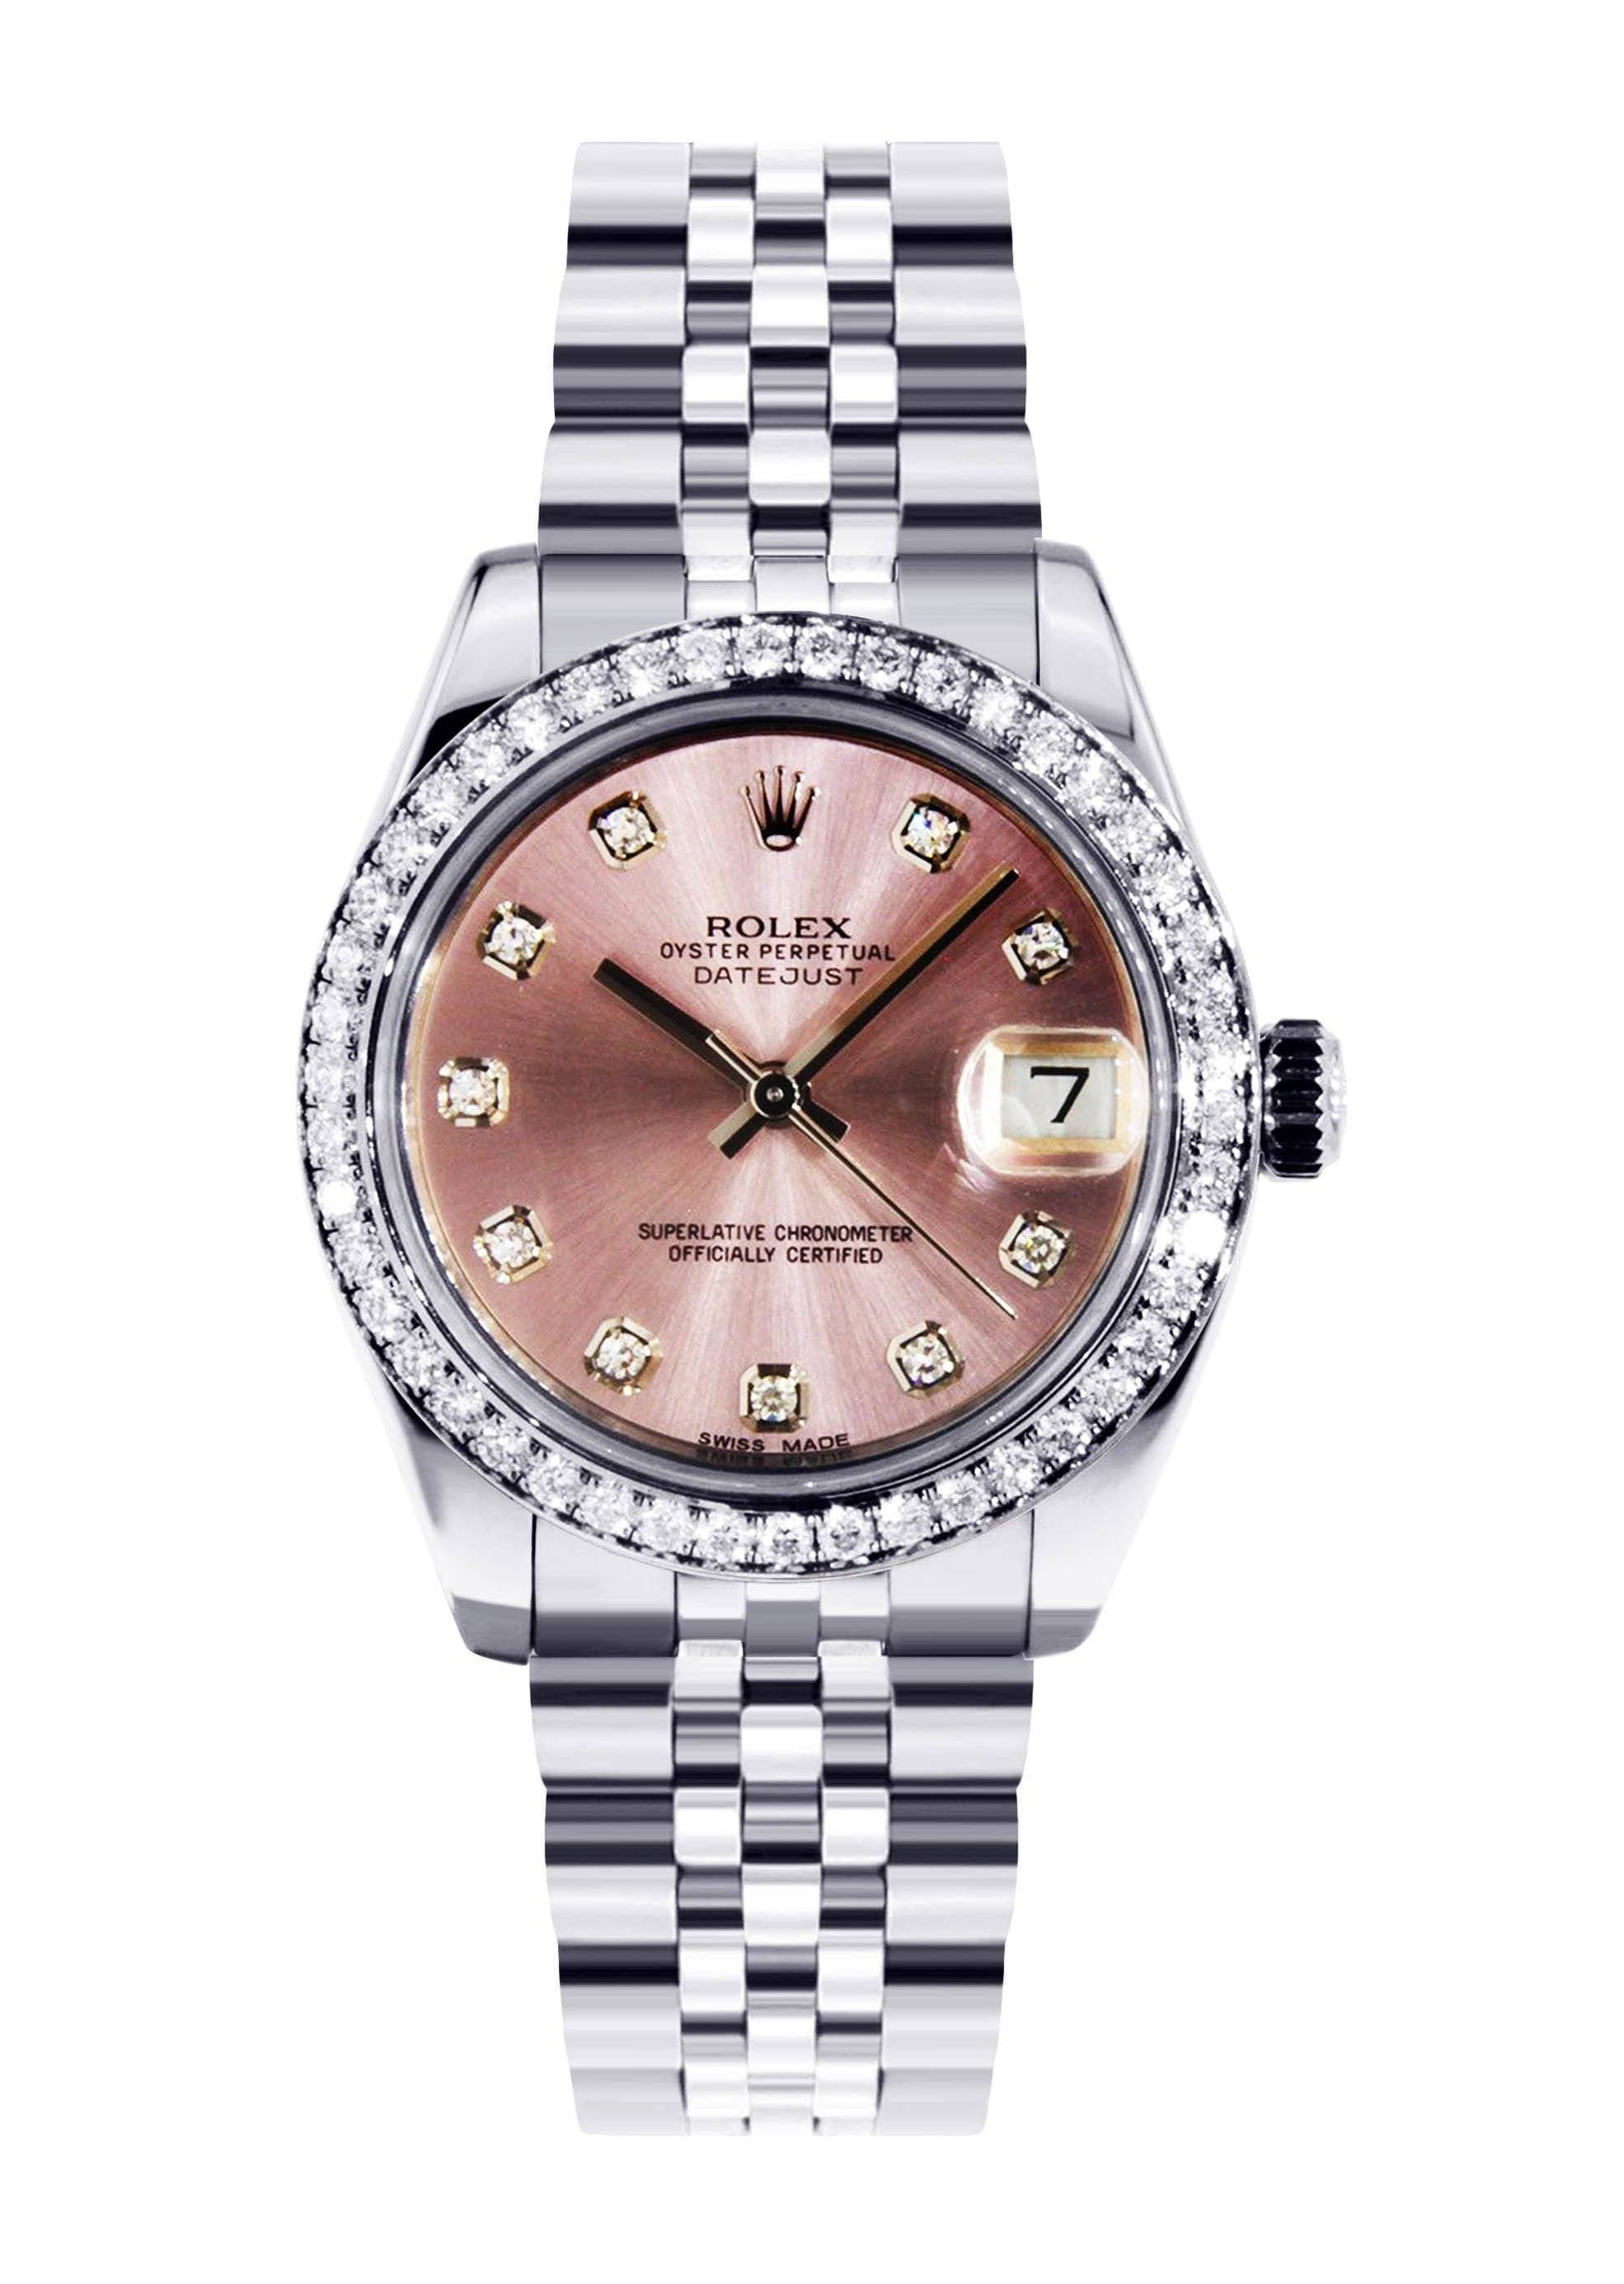 Rolex Datejust Watch For Women Stainless Steel 31 Mm FrostNYC